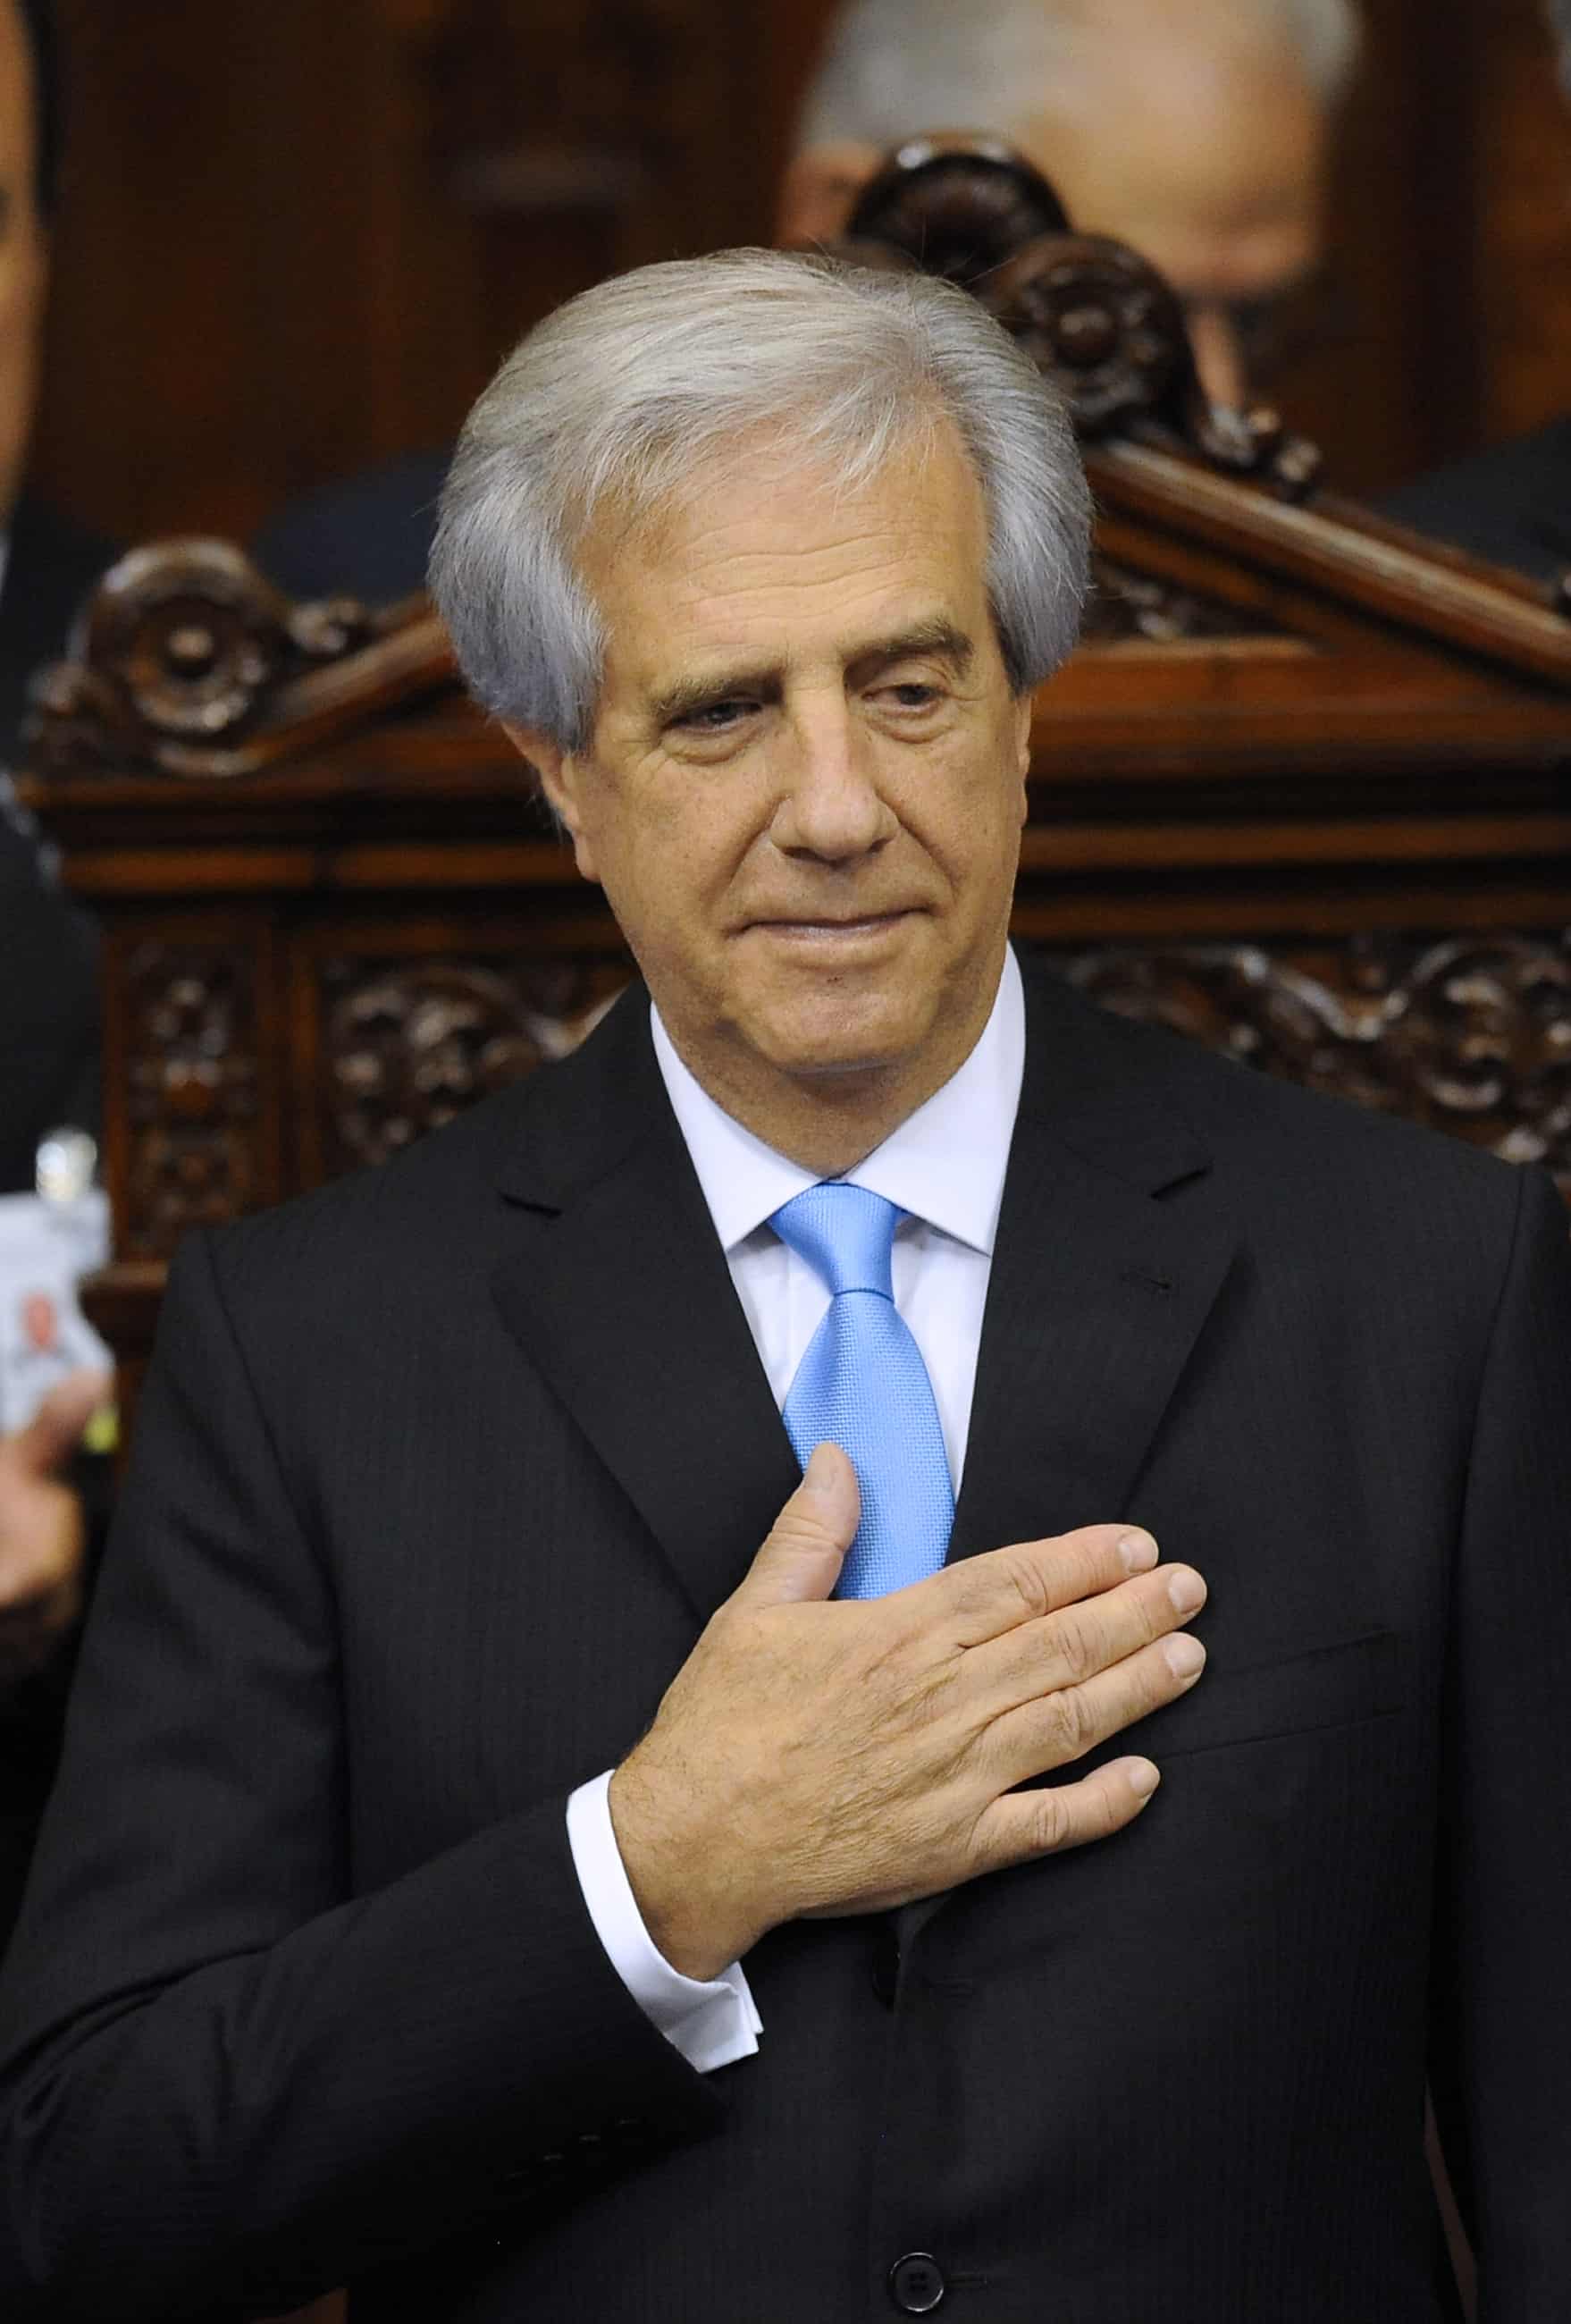 Newly sworn-in Uruguayan President Tabaré Vázquez is seen at the Congress in Montevideo on March 1, 2015.